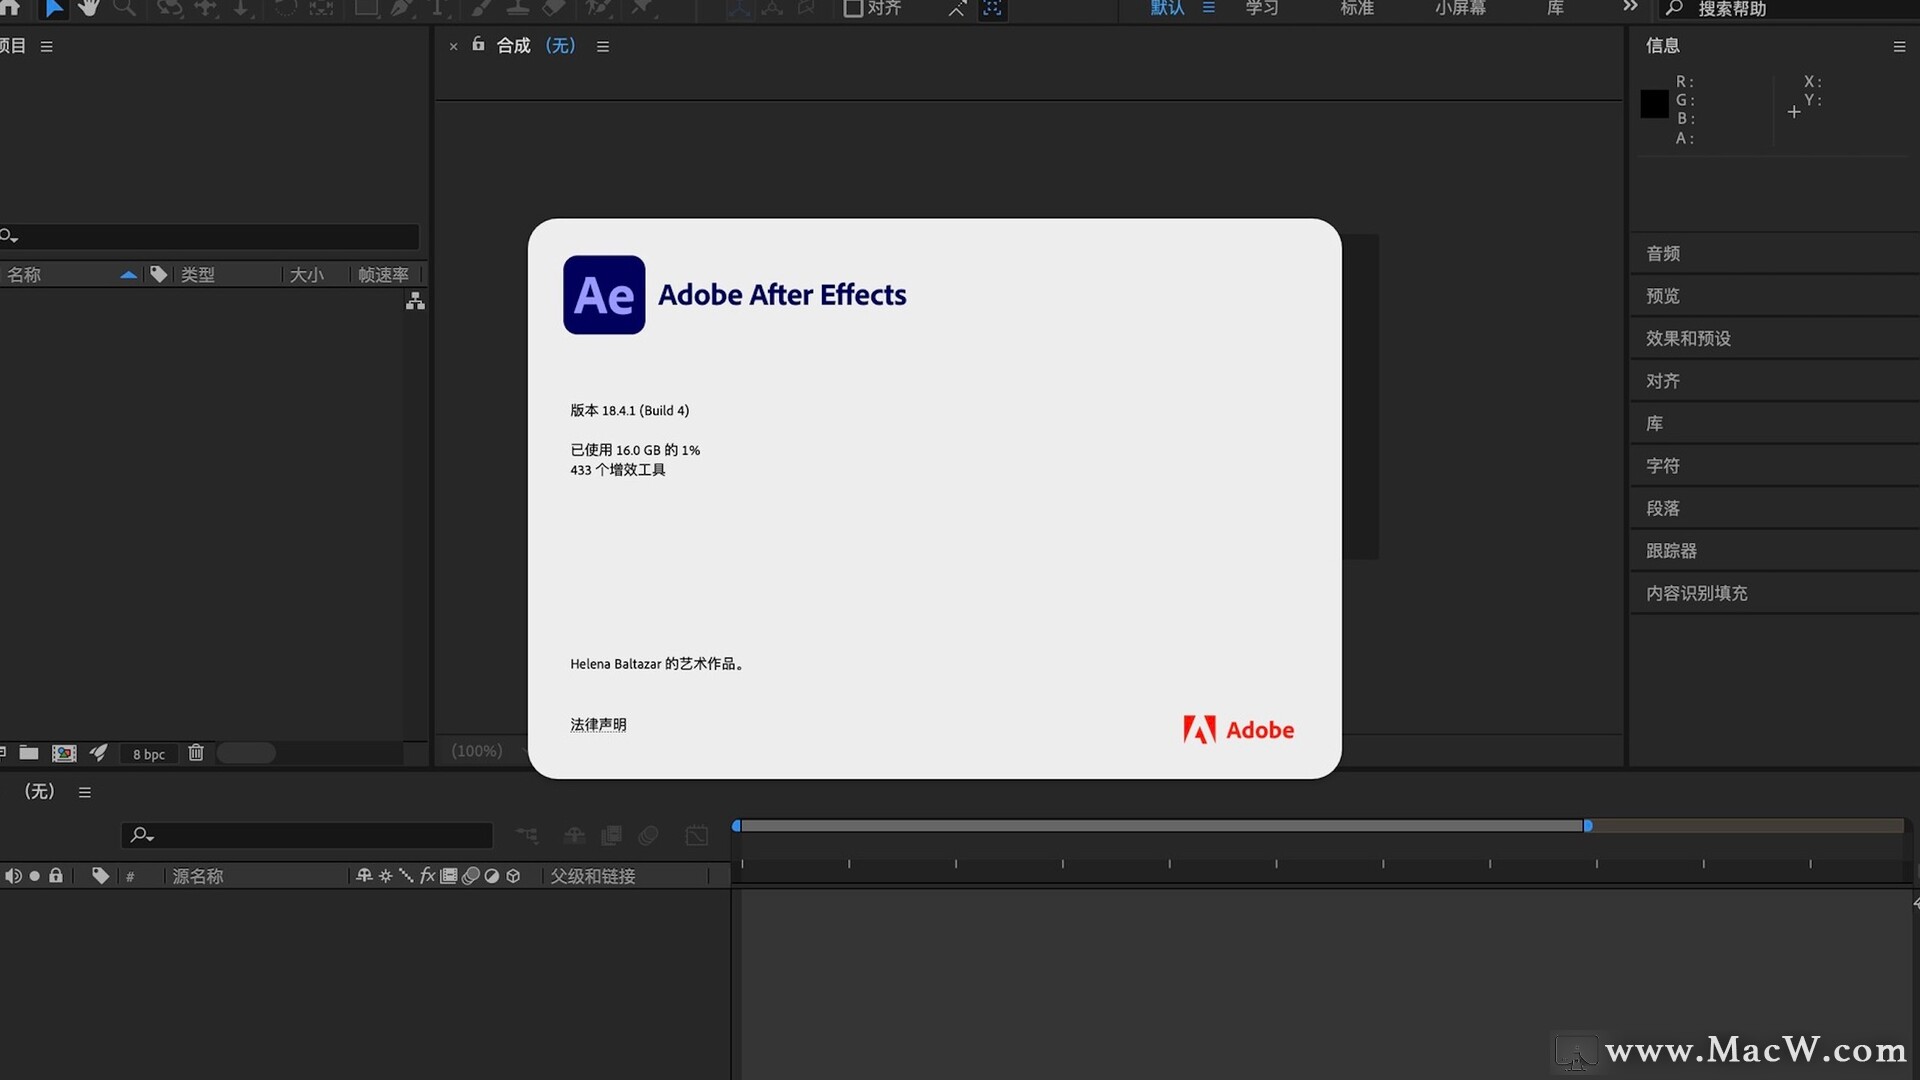 After Effects 2021 for Mac(ae 2021) v18.4.1中文激活版 - 图1